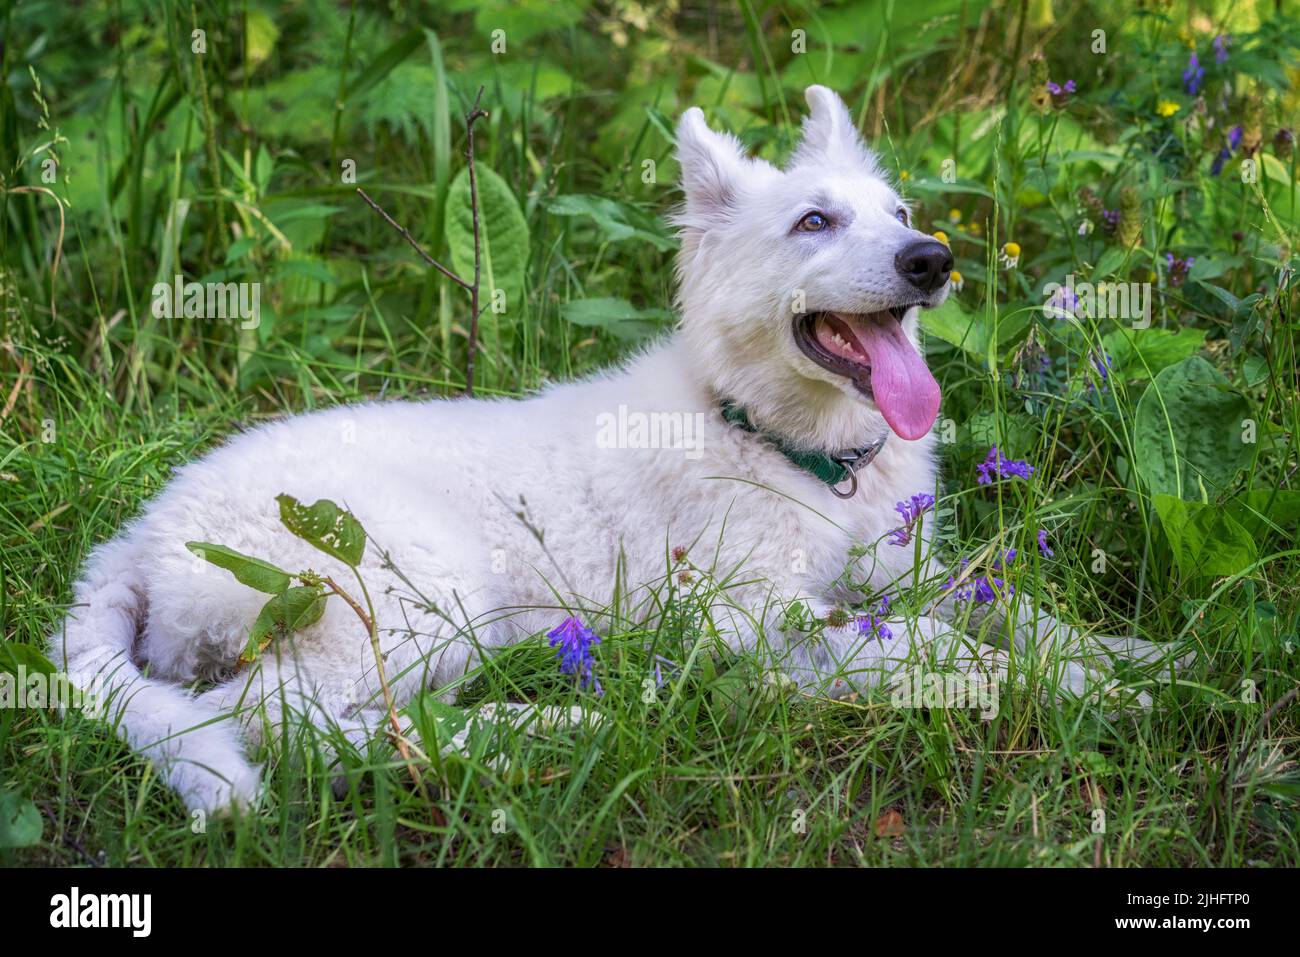 Puppy 3.5 months old White Swiss Shepherd or Berger Blanc Suisse Dog long coat lies in the grass Stock Photo